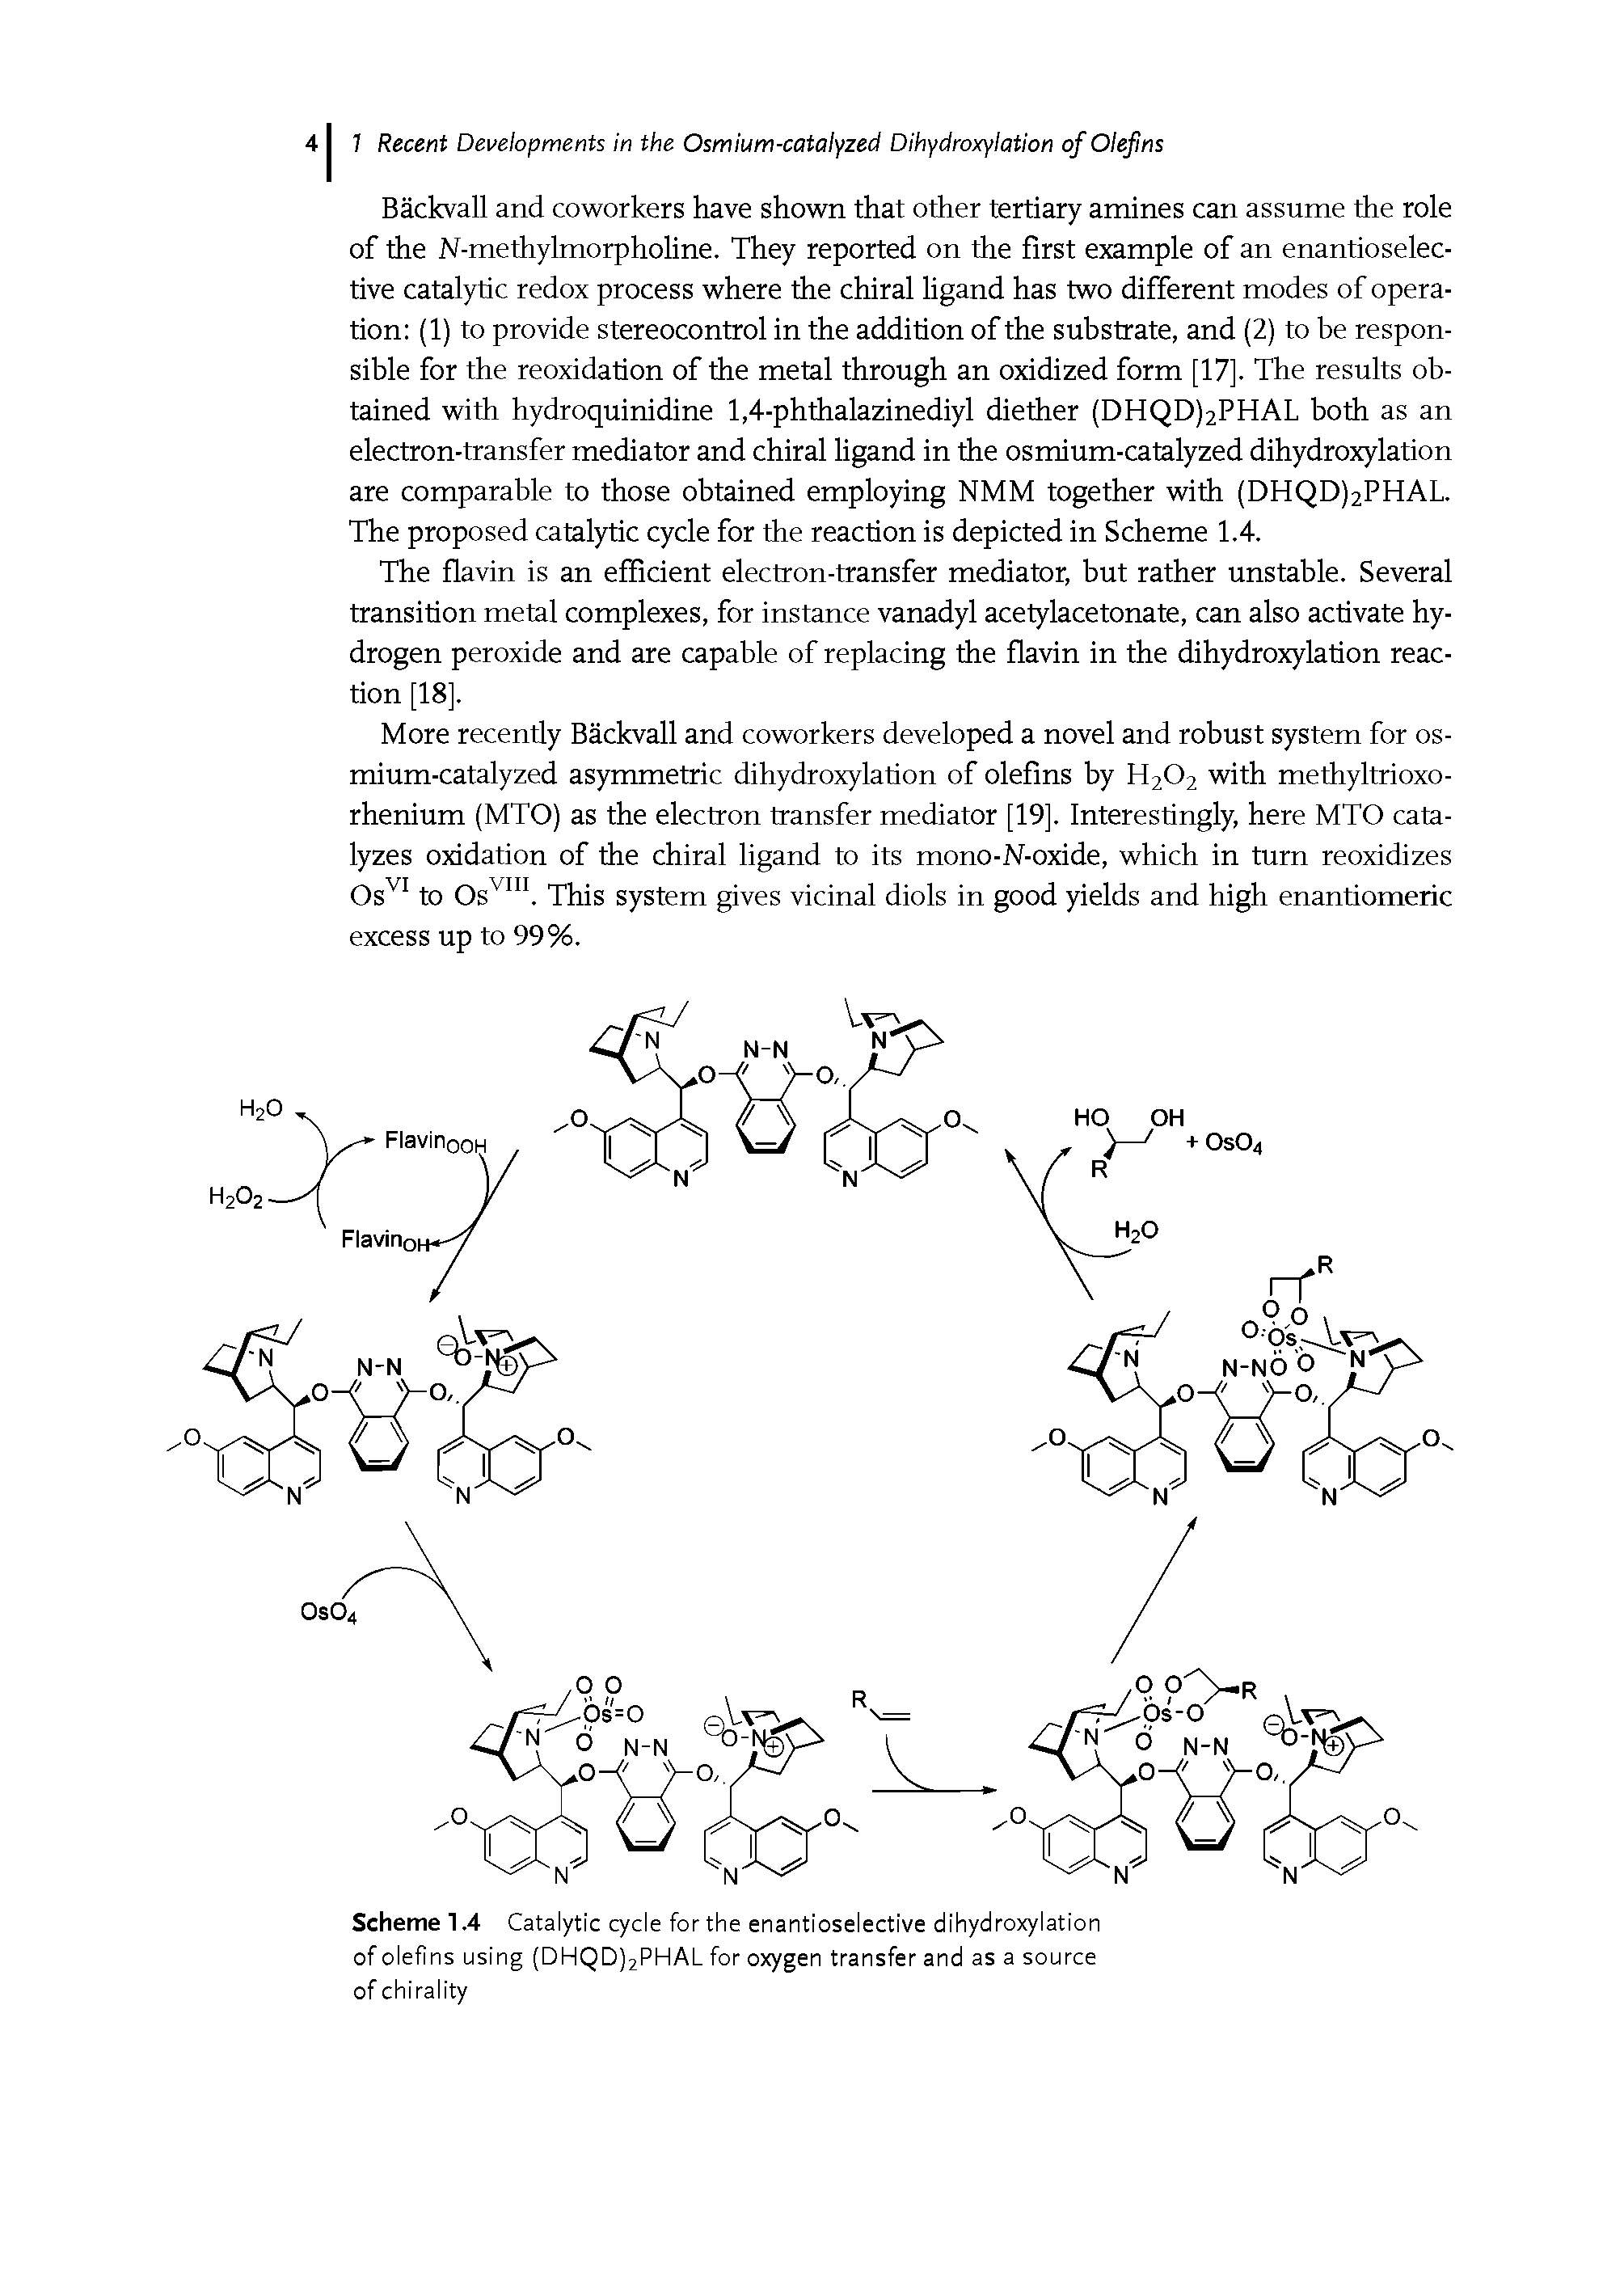 Scheme 1.4 Catalytic cycle for the enantioselective dihydroxylation of olefins using (DHQDjjPHAL for oxygen transfer and as a source of chirality...